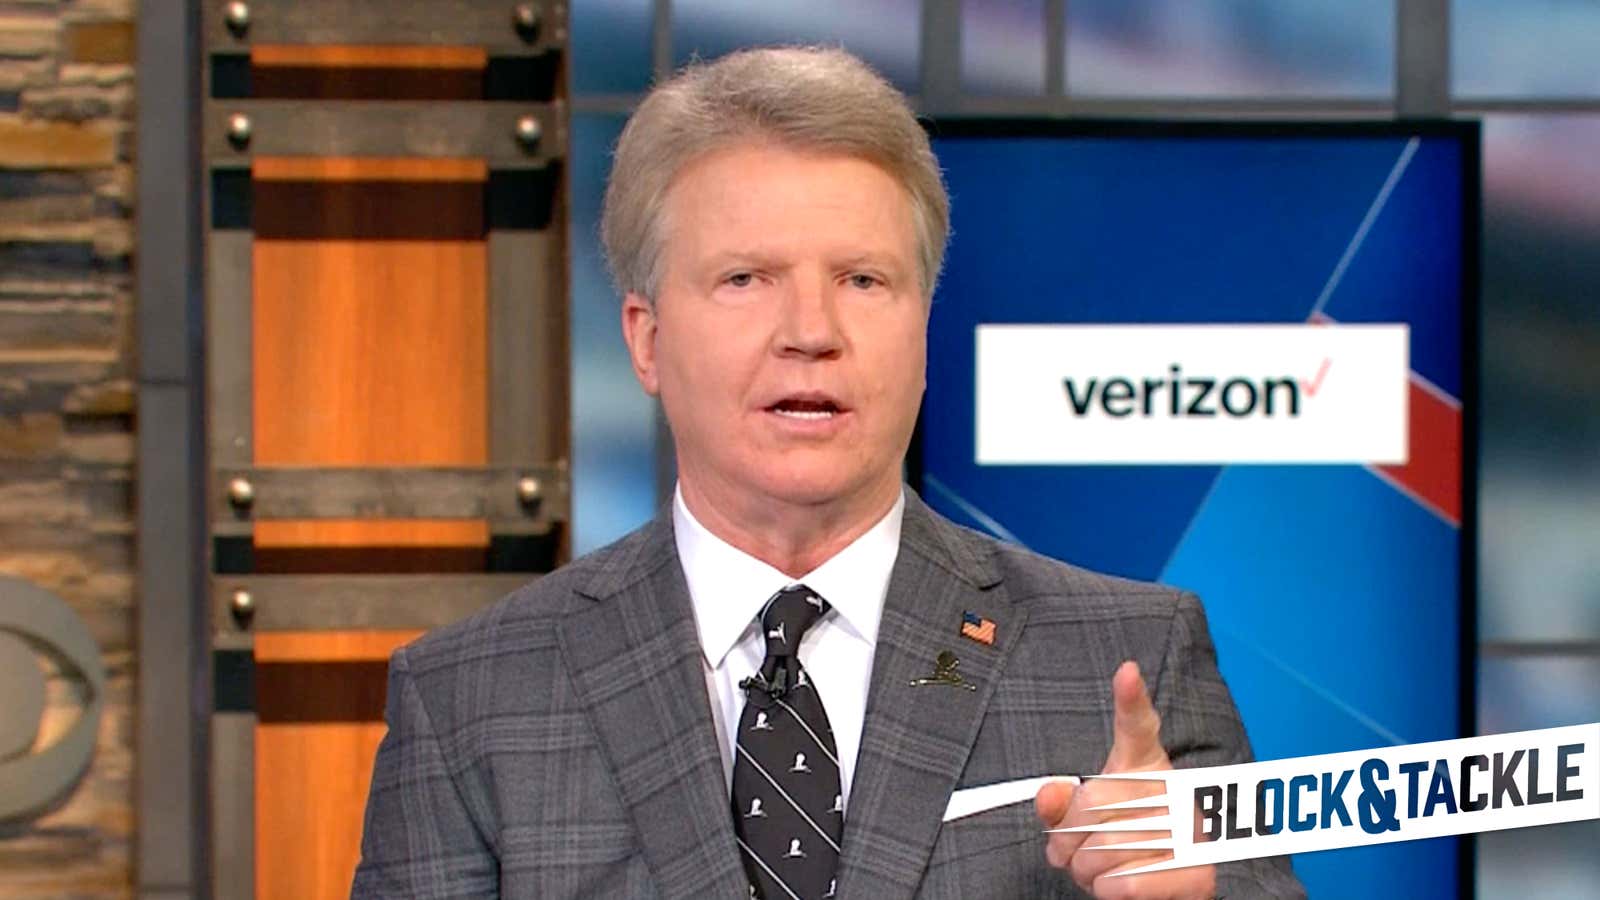 CBS commentator and NFL poet laureate Phil Simms makes a pointed observation during halftime coverage on CBS.